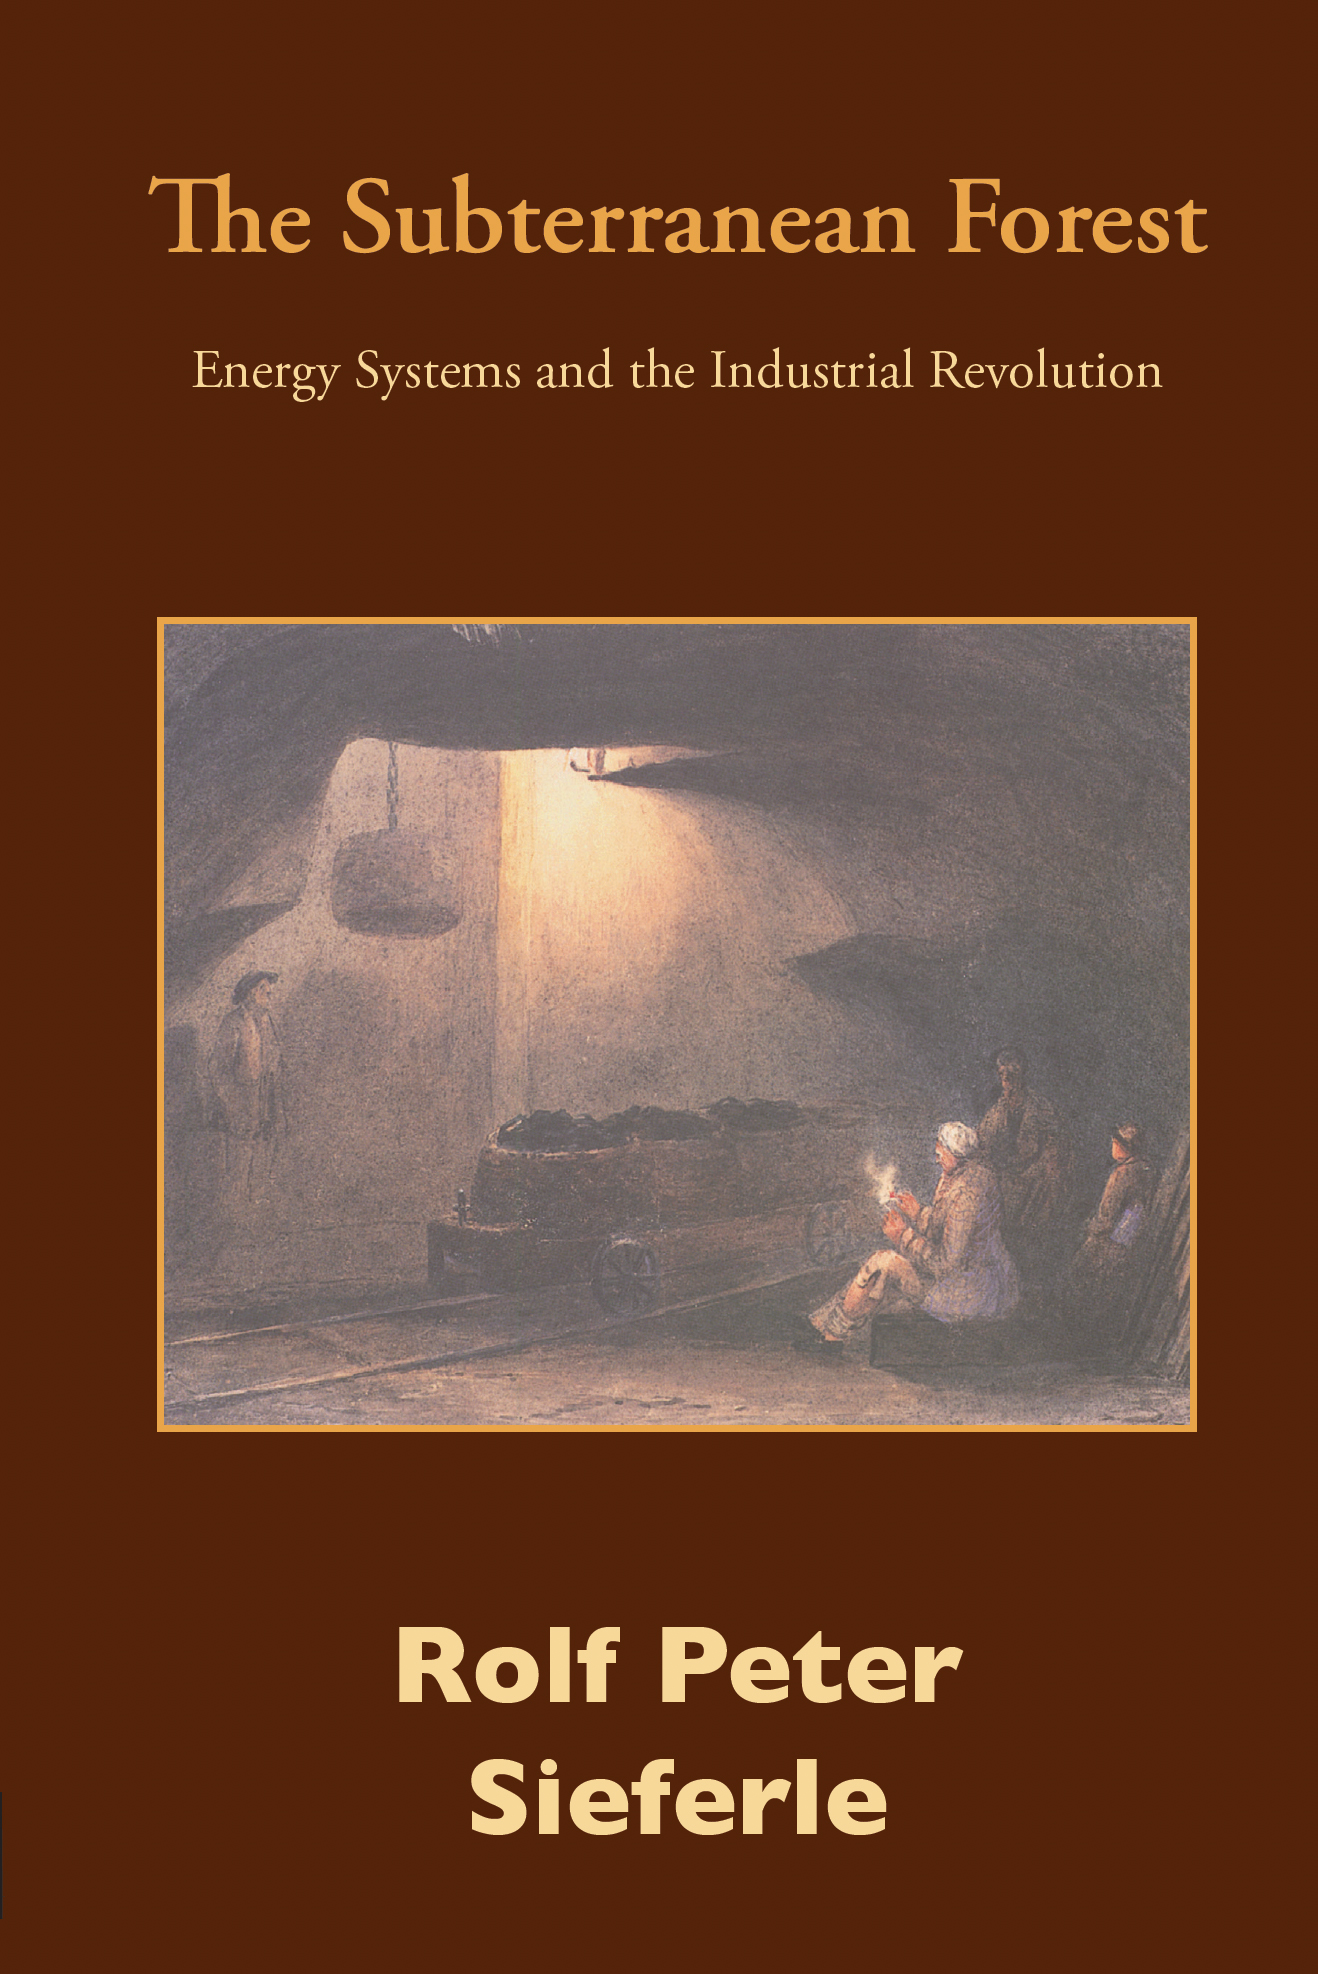 The Subterranean Forest: Energy Systems and the Industrial Revolution (The White Horse Press, 2010)